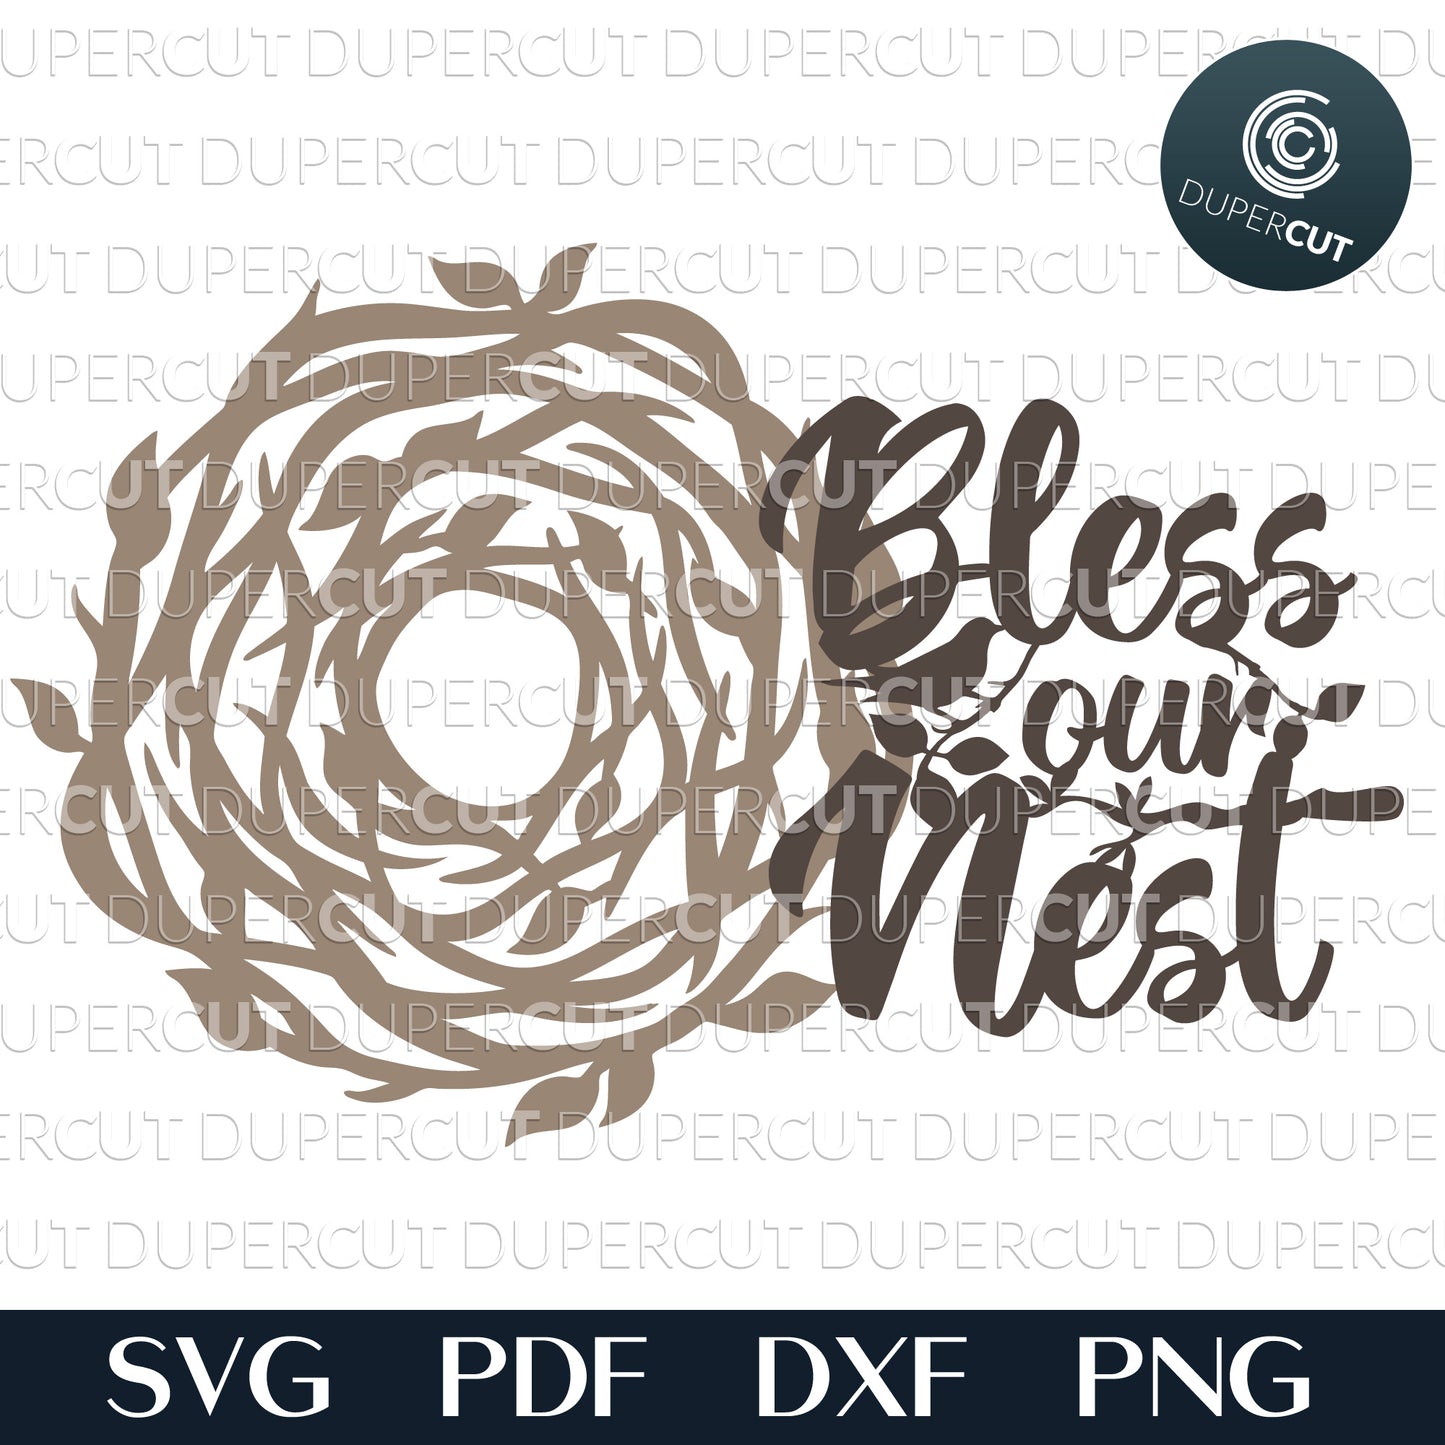 Bless our nest - layered template scroll saw pattern. SVG PDF DXF files for laser cutting, engraving, Cricut, Silhouette Cameo, Glowforge, CNC Plasma machines by DuperCut